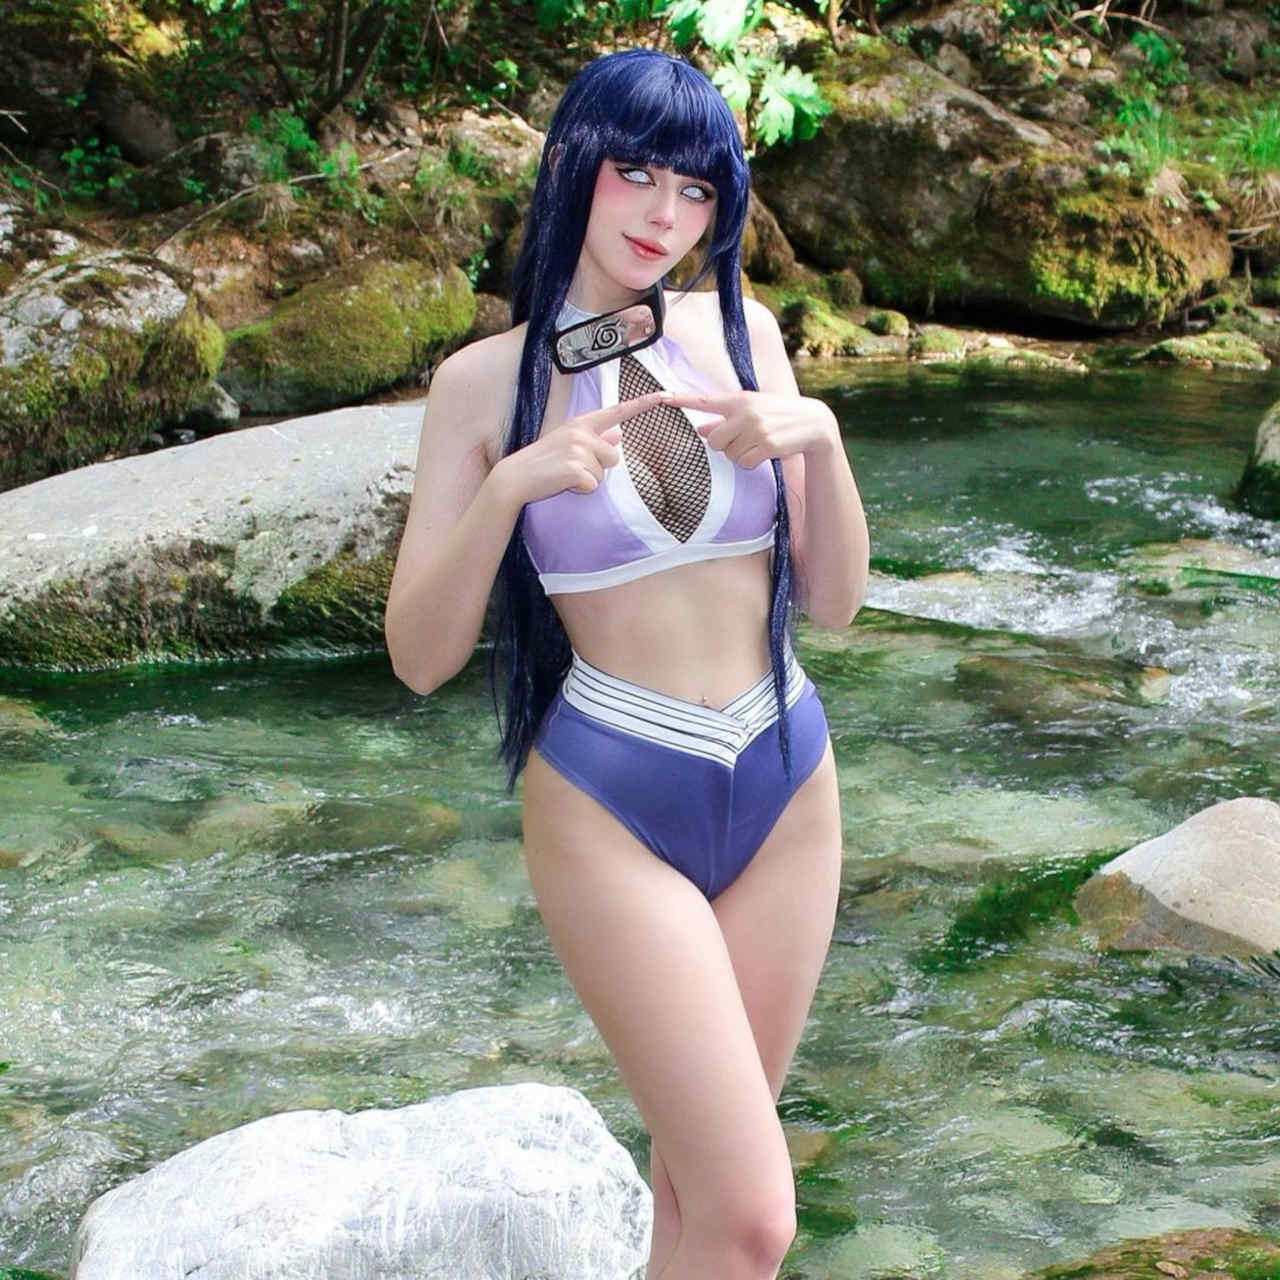 Hinata cooled off in the river with a cosplay ideal for the heat